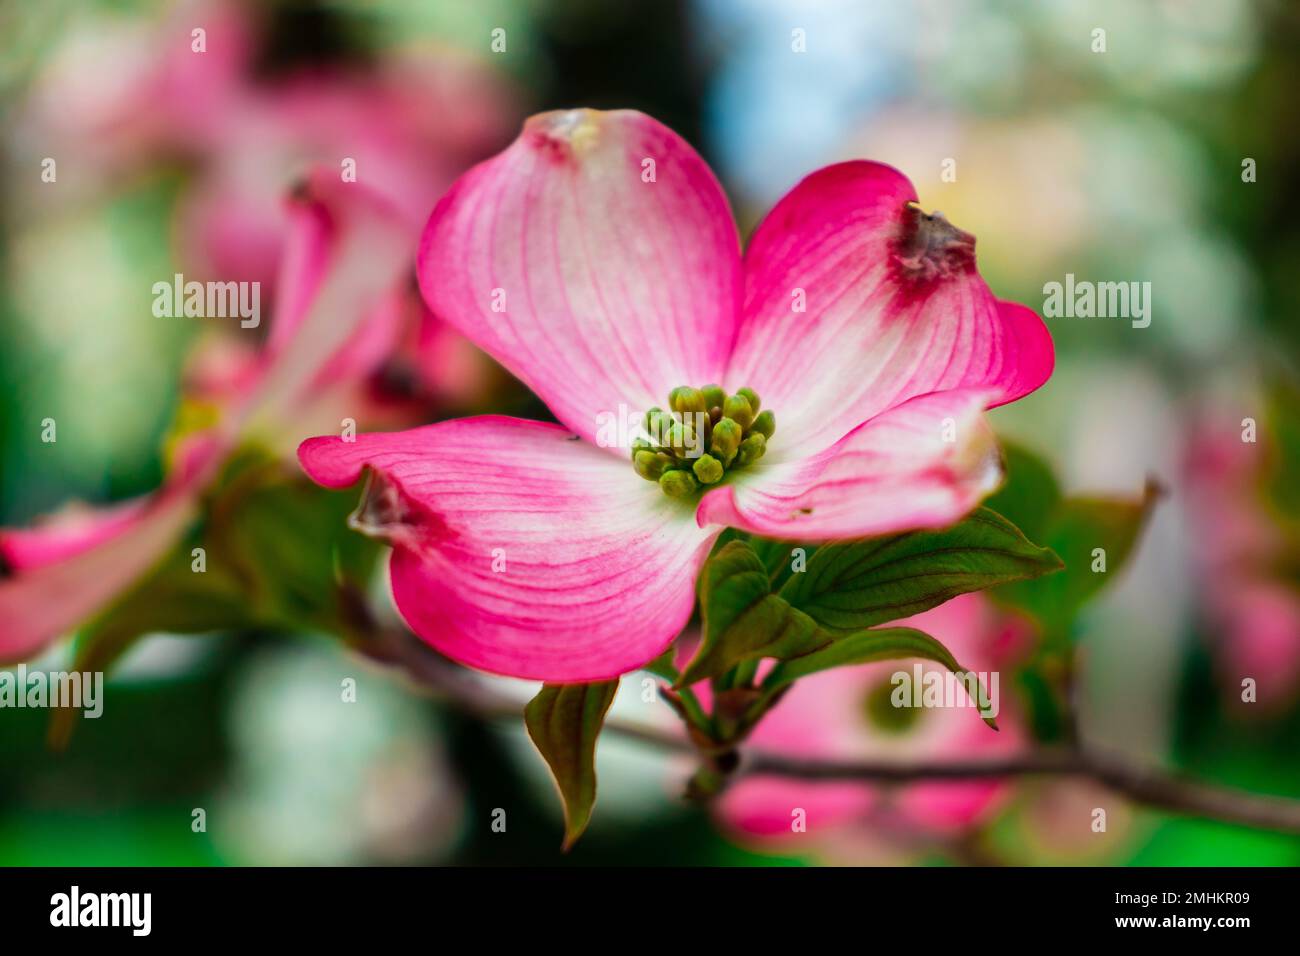 Dogwood flowers in spring. Beautiful white Dogwood blossoms up close. Delicate natural beauty outdoors. Decorative flower bush in springtime. Stock Photo